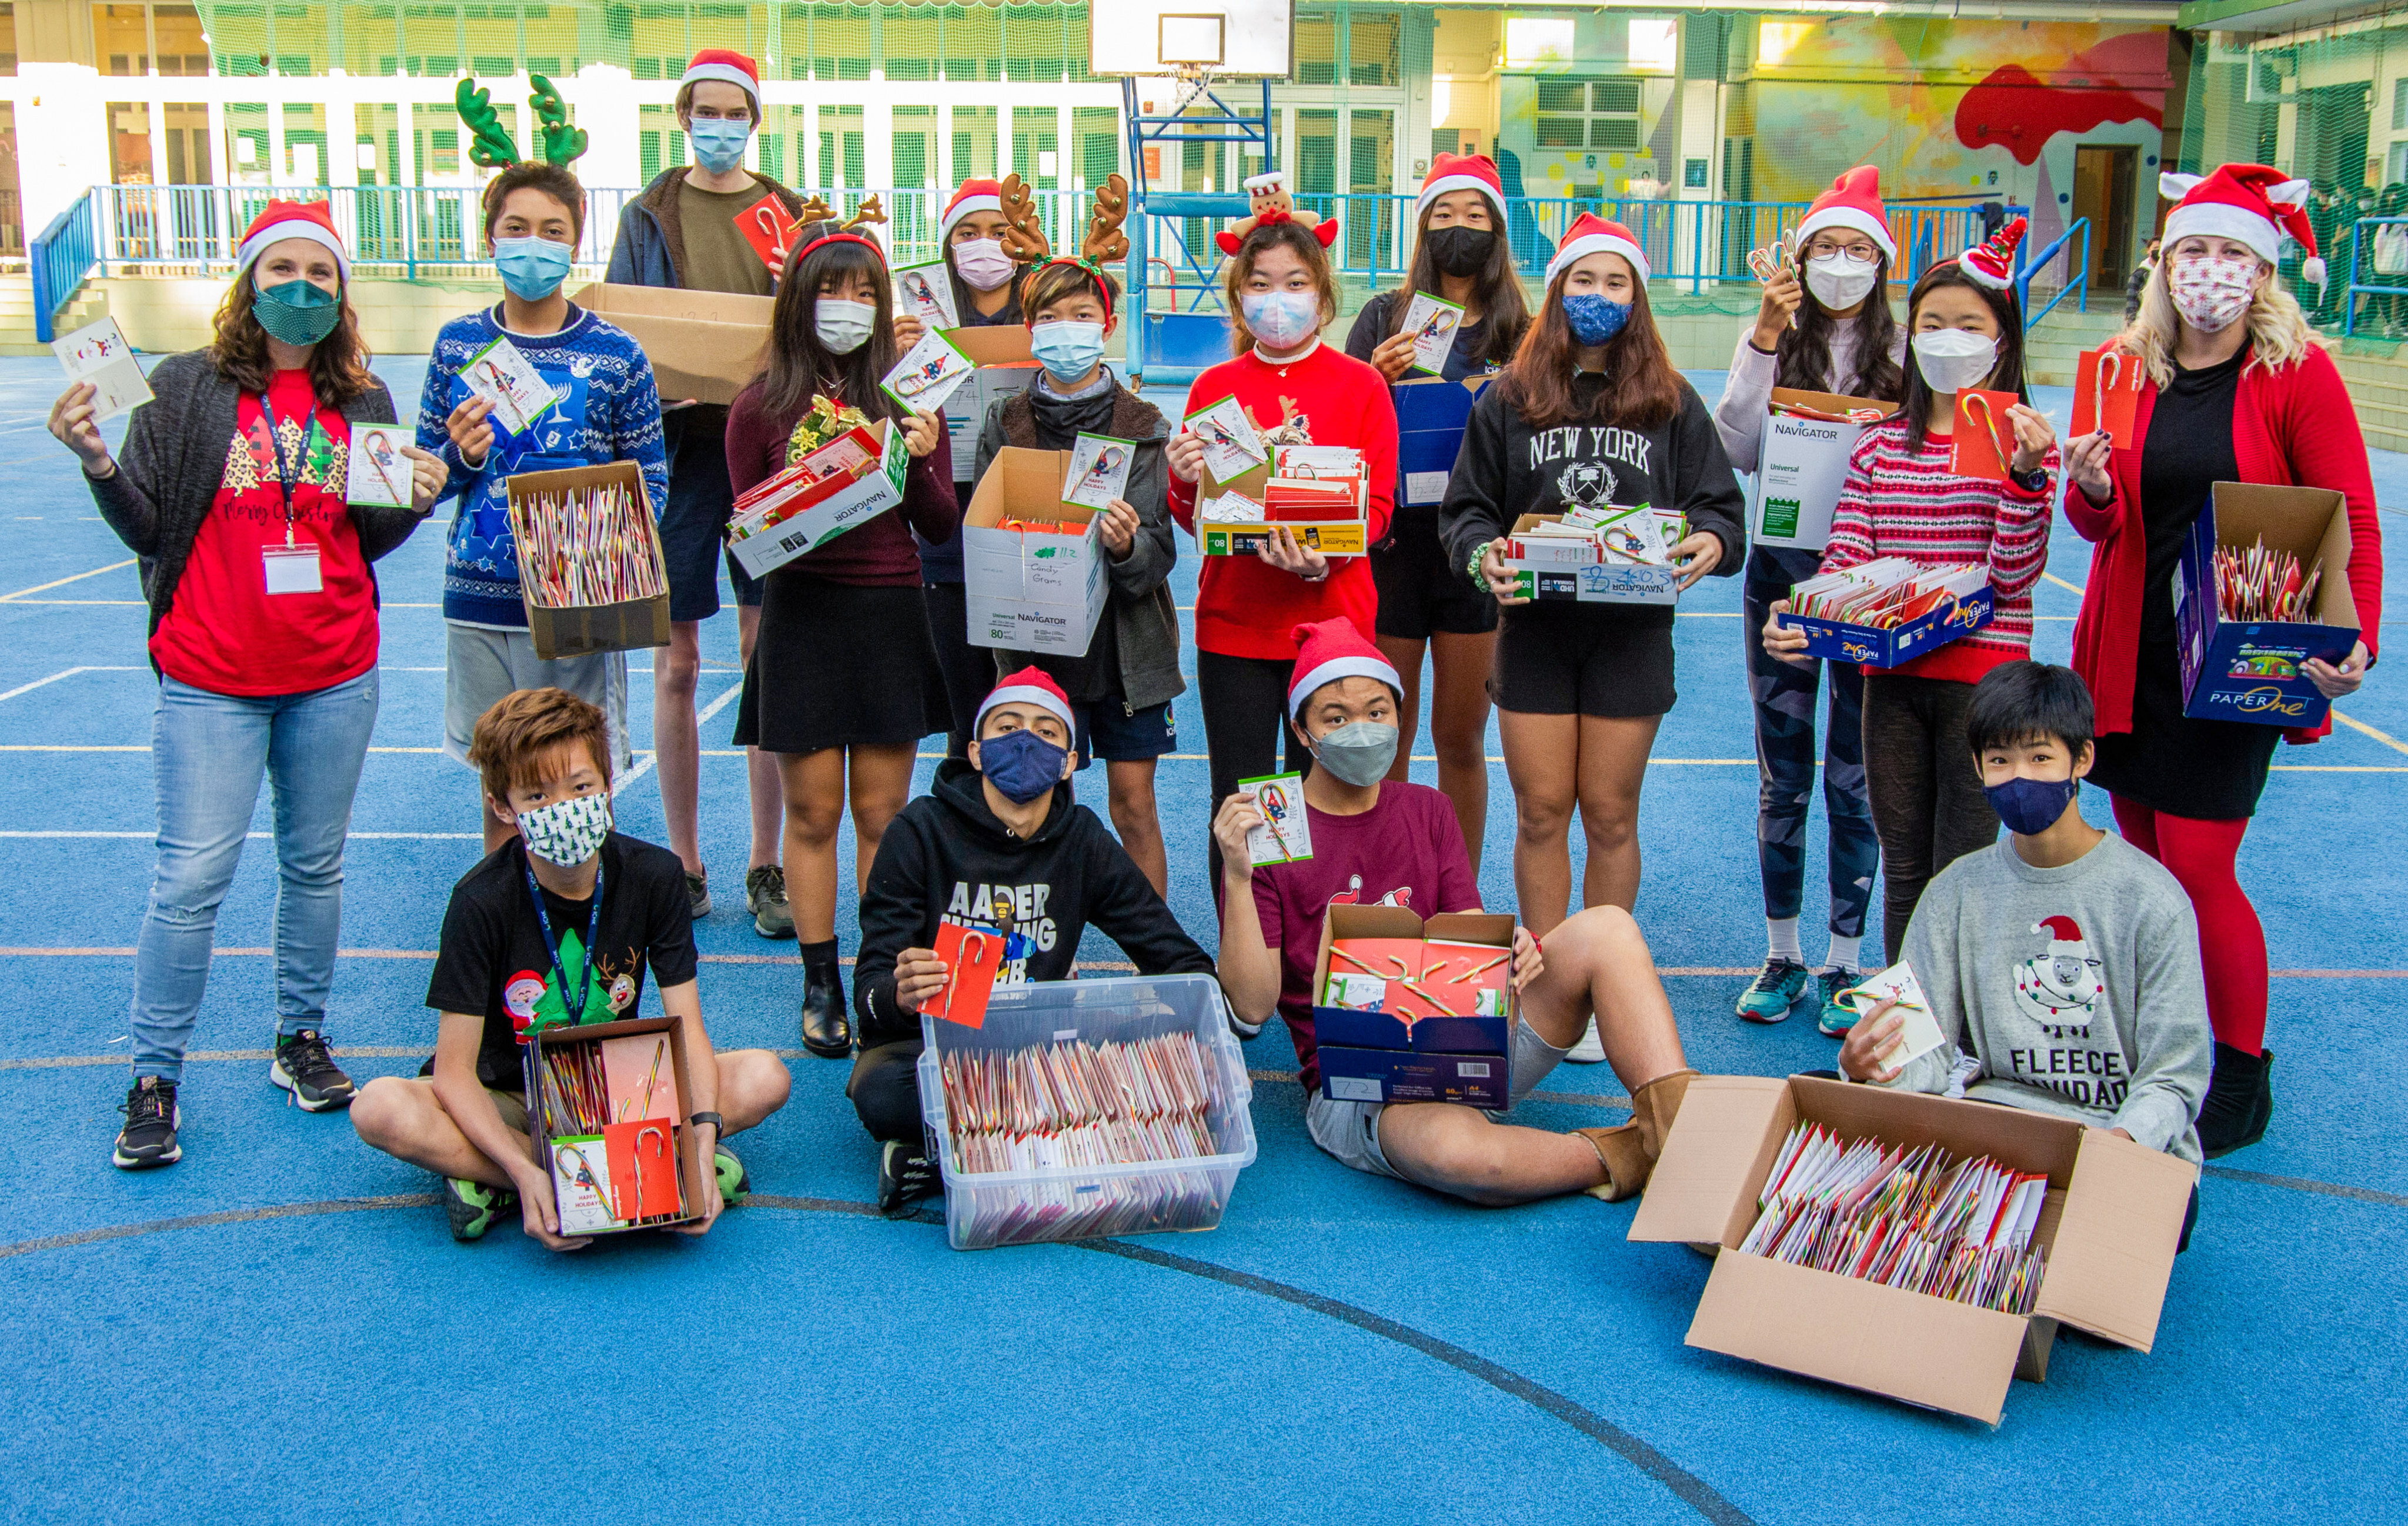 The Student Representative Council and supervisors at International College Hong Kong were ready to hand out the candy cane grams, which are mini greeting cards students can send to anyone at school. Photo: Handout